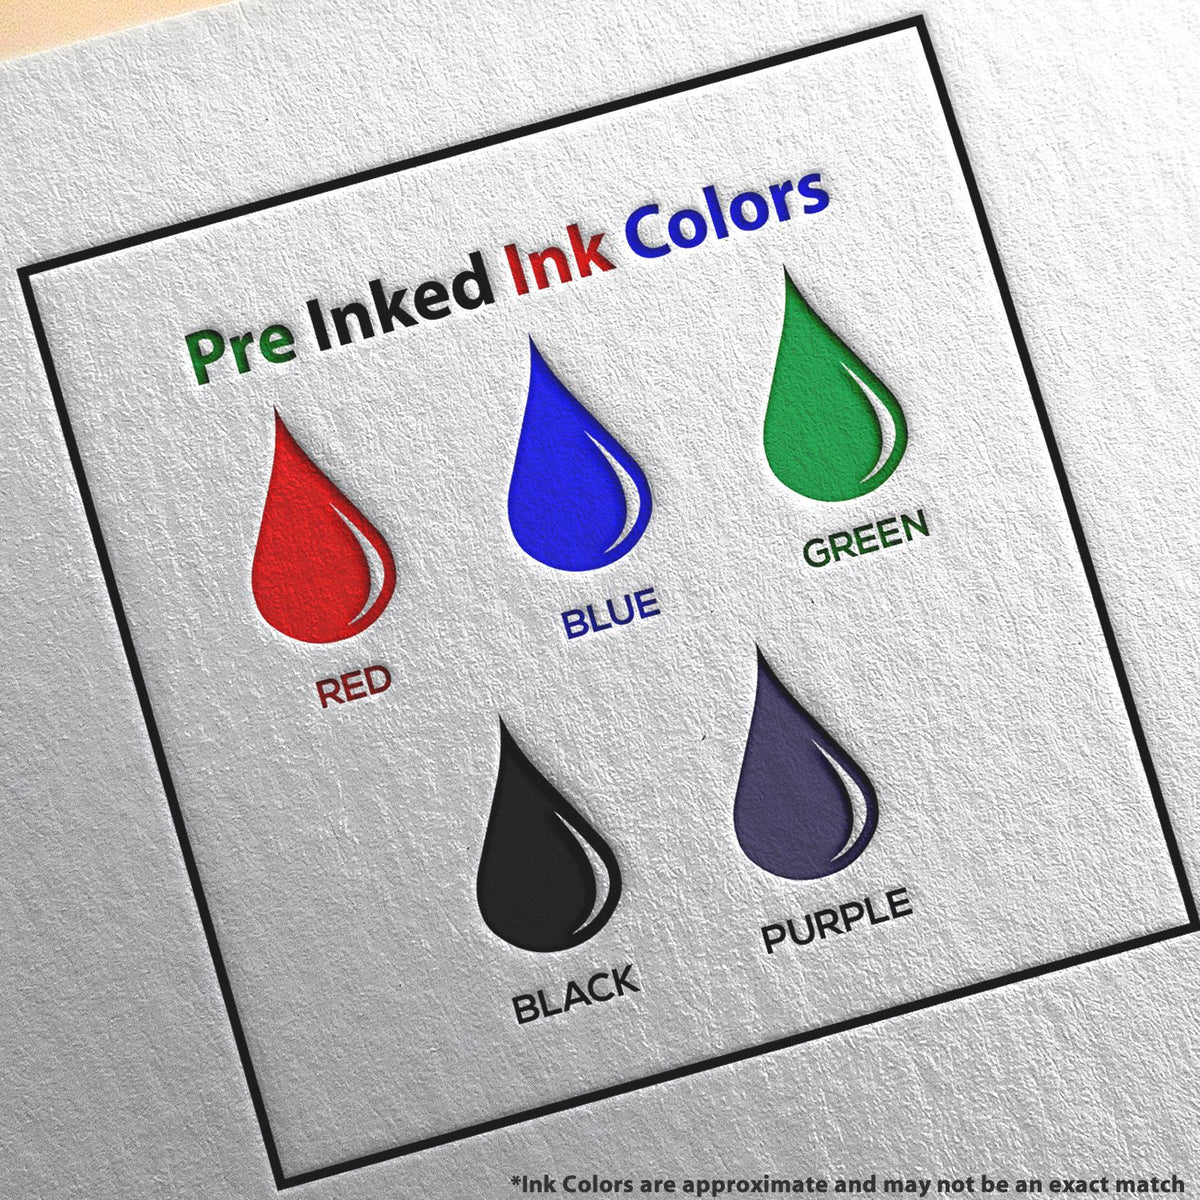 A picture showing the different ink colors or hues available for the PSI Connecticut Notary Stamp product.